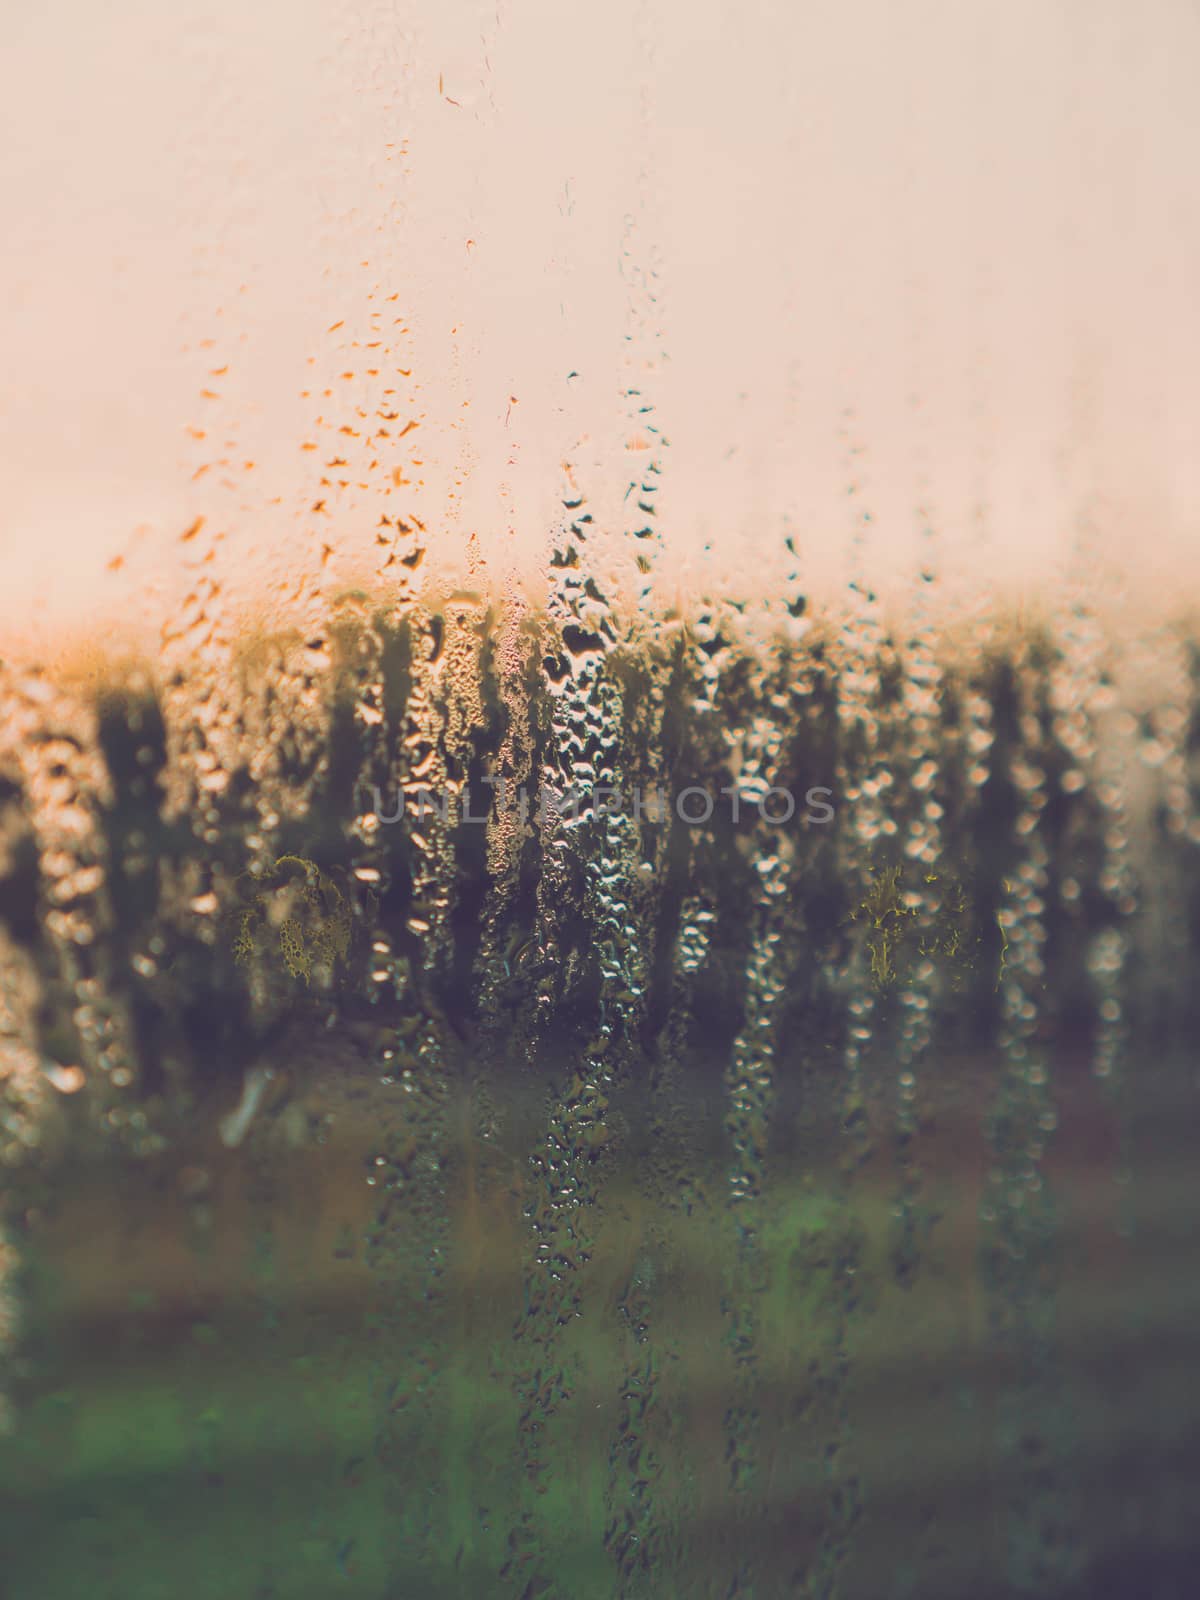 Raindrops on the glass window. by ronnarong